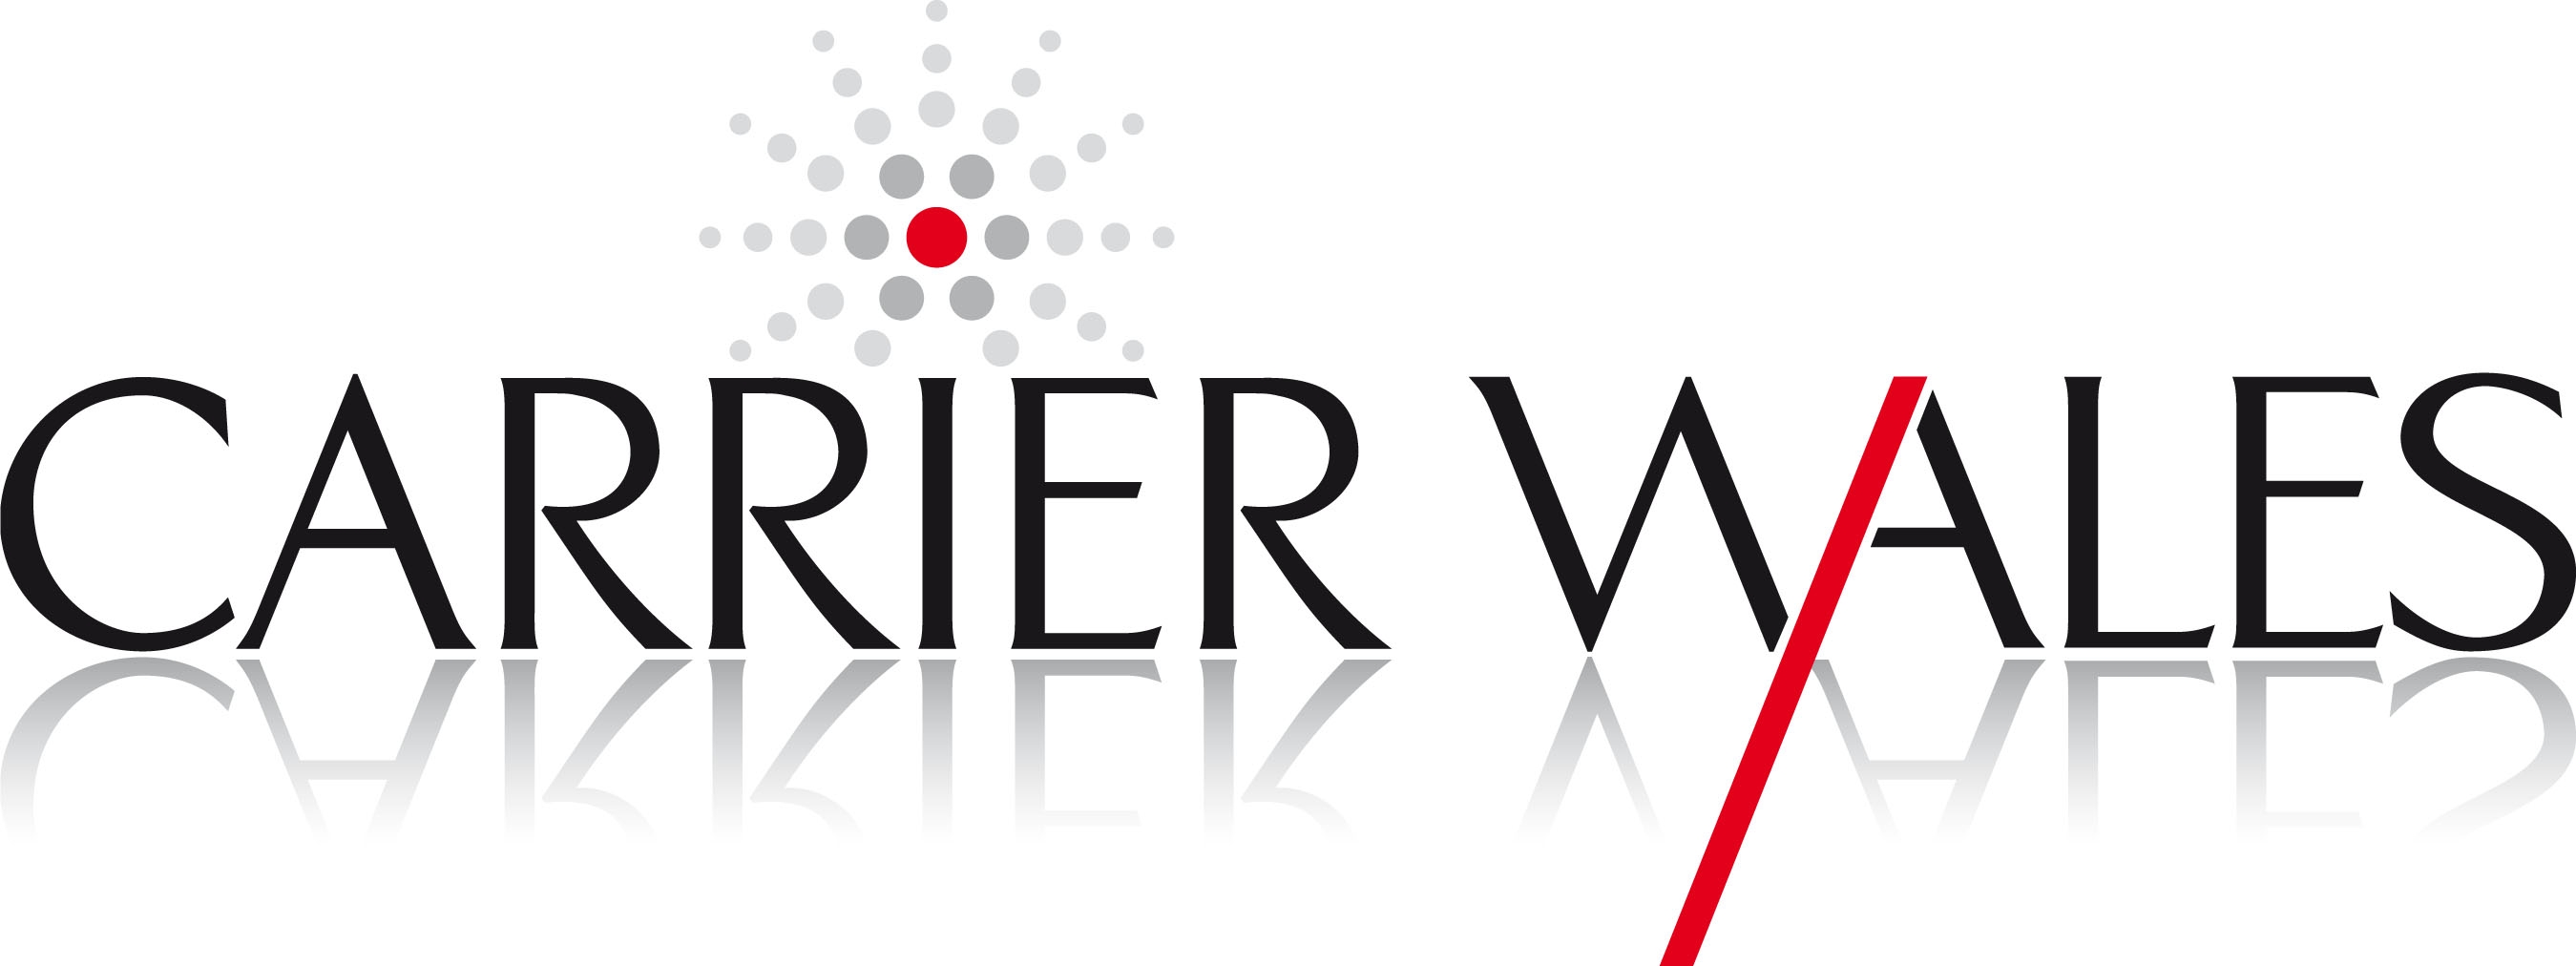 Carrier Wales Logo